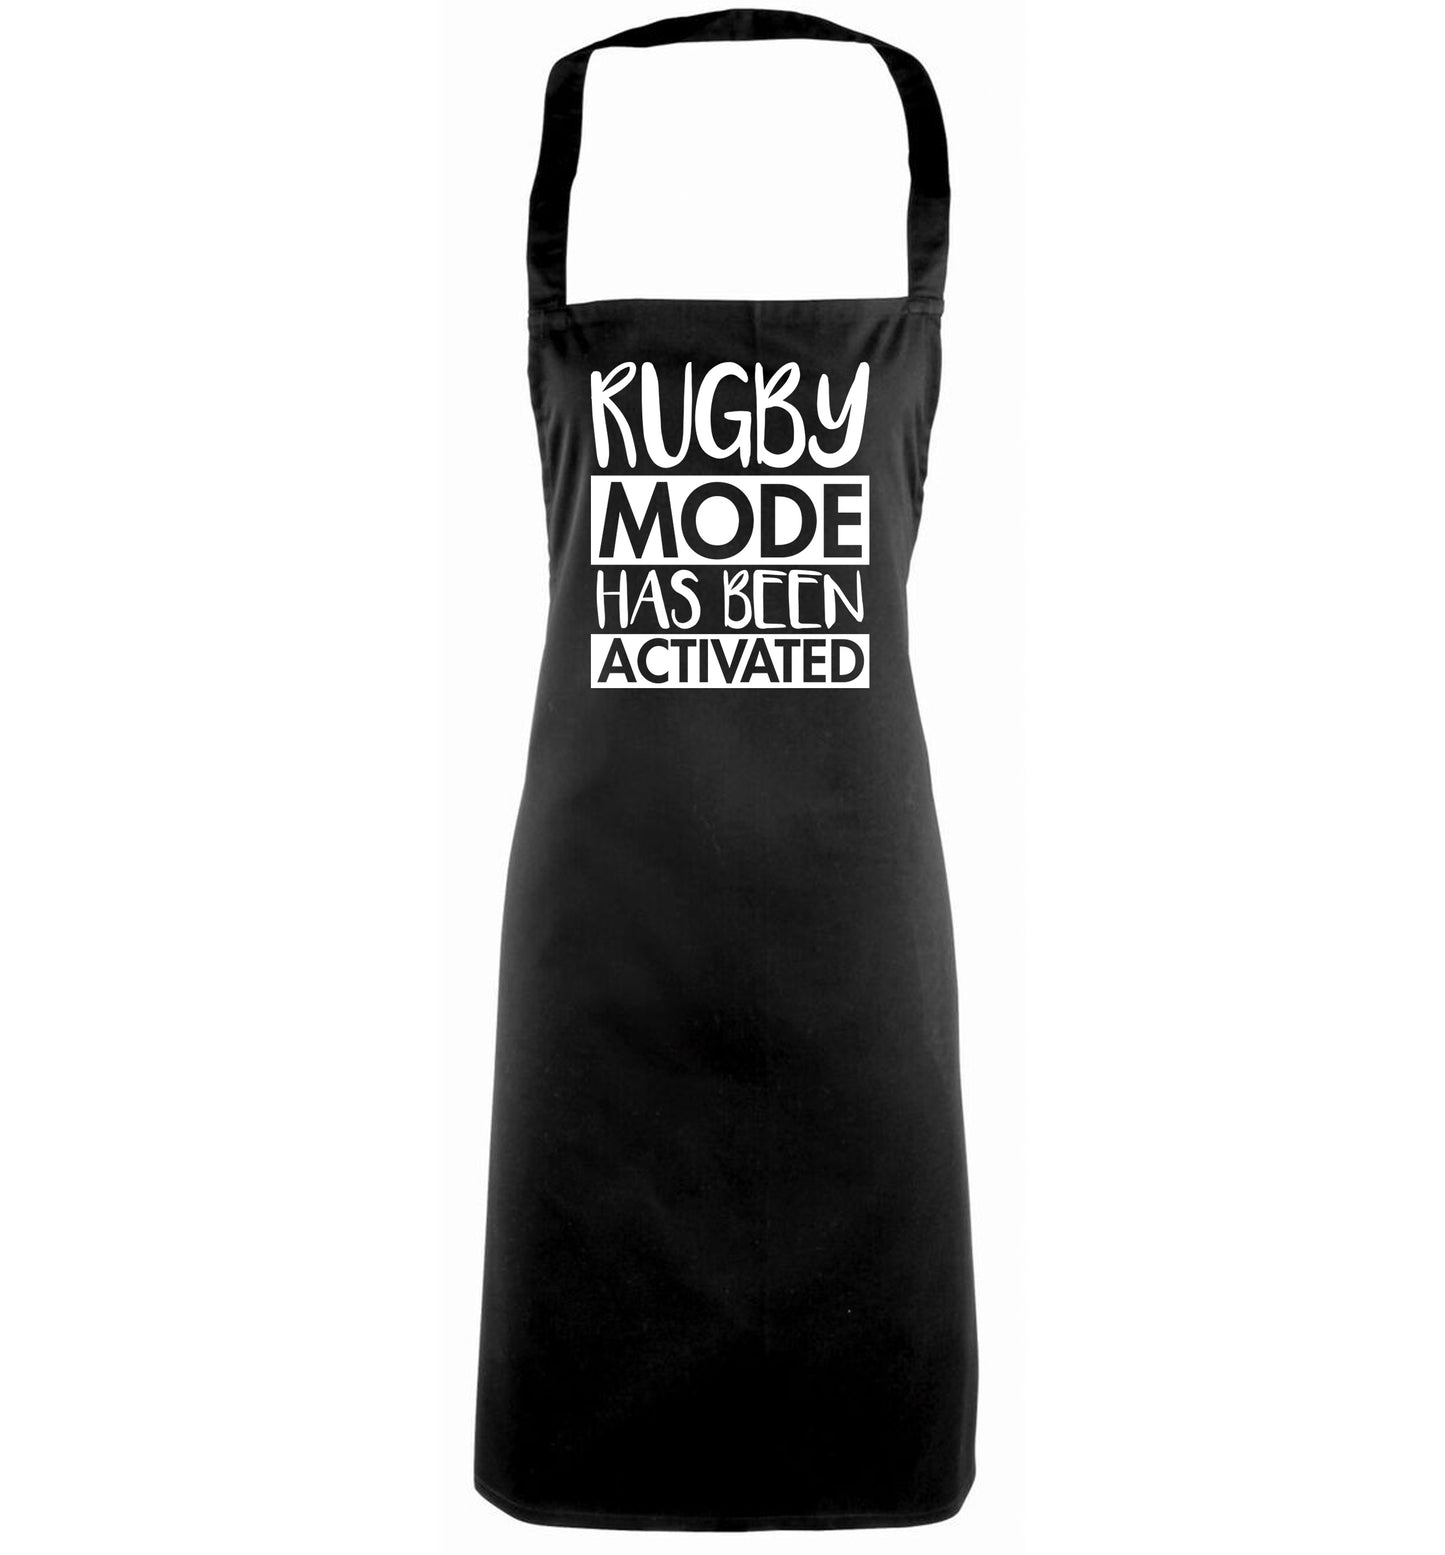 Rugby mode activated black apron